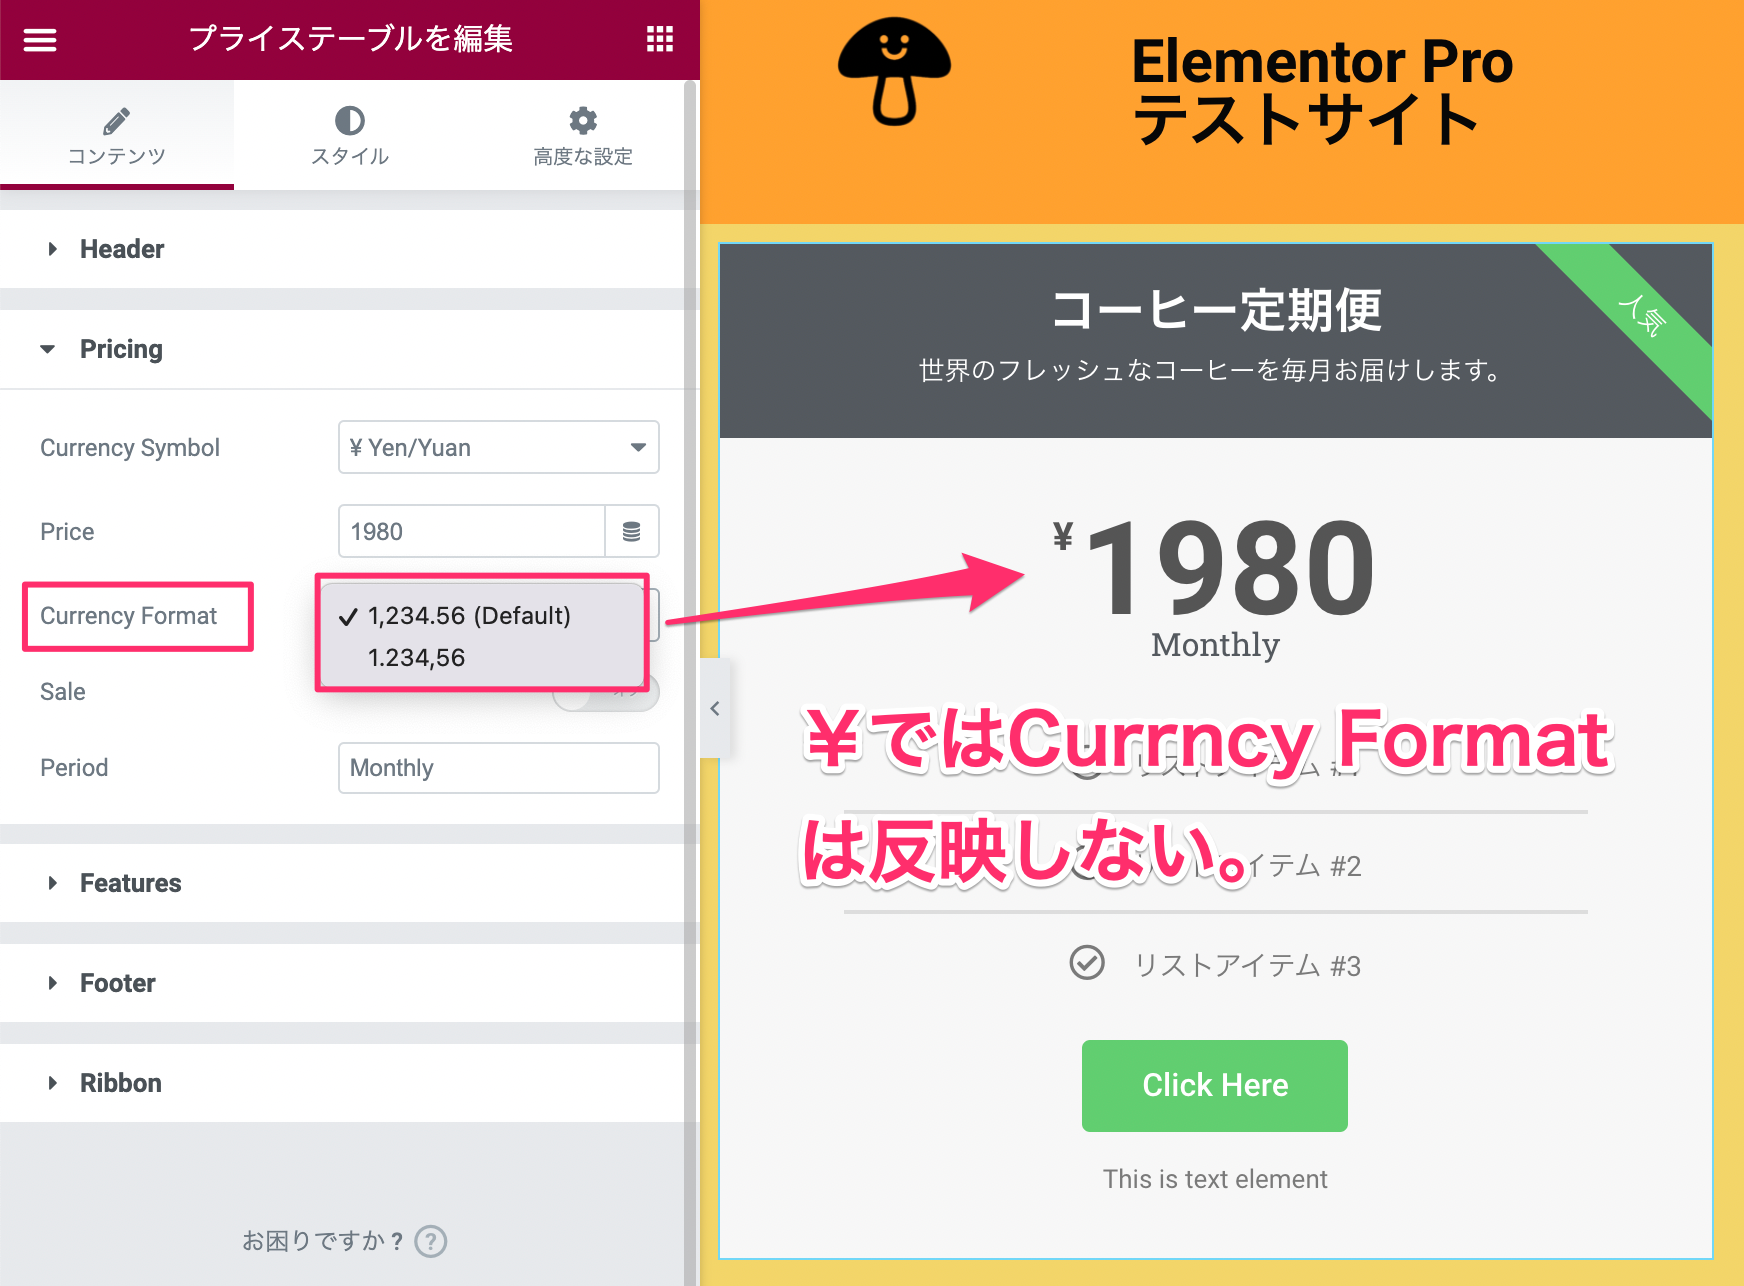 Currency Formatのリストと説明